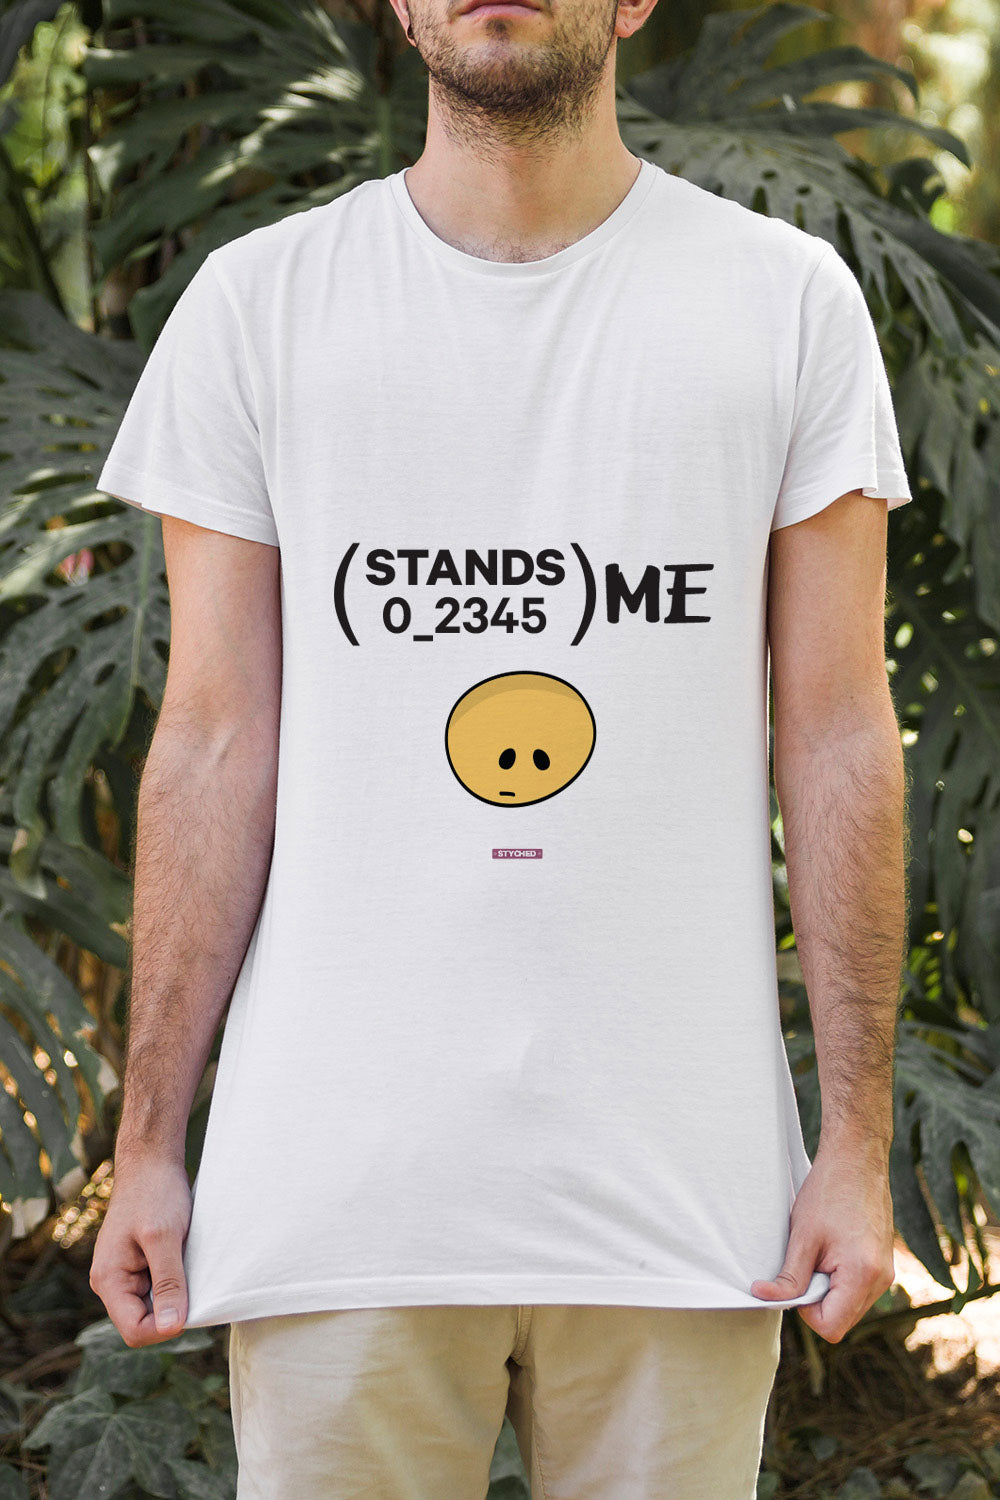 No 1 Understands Me - Graphic T-Shirt White Color